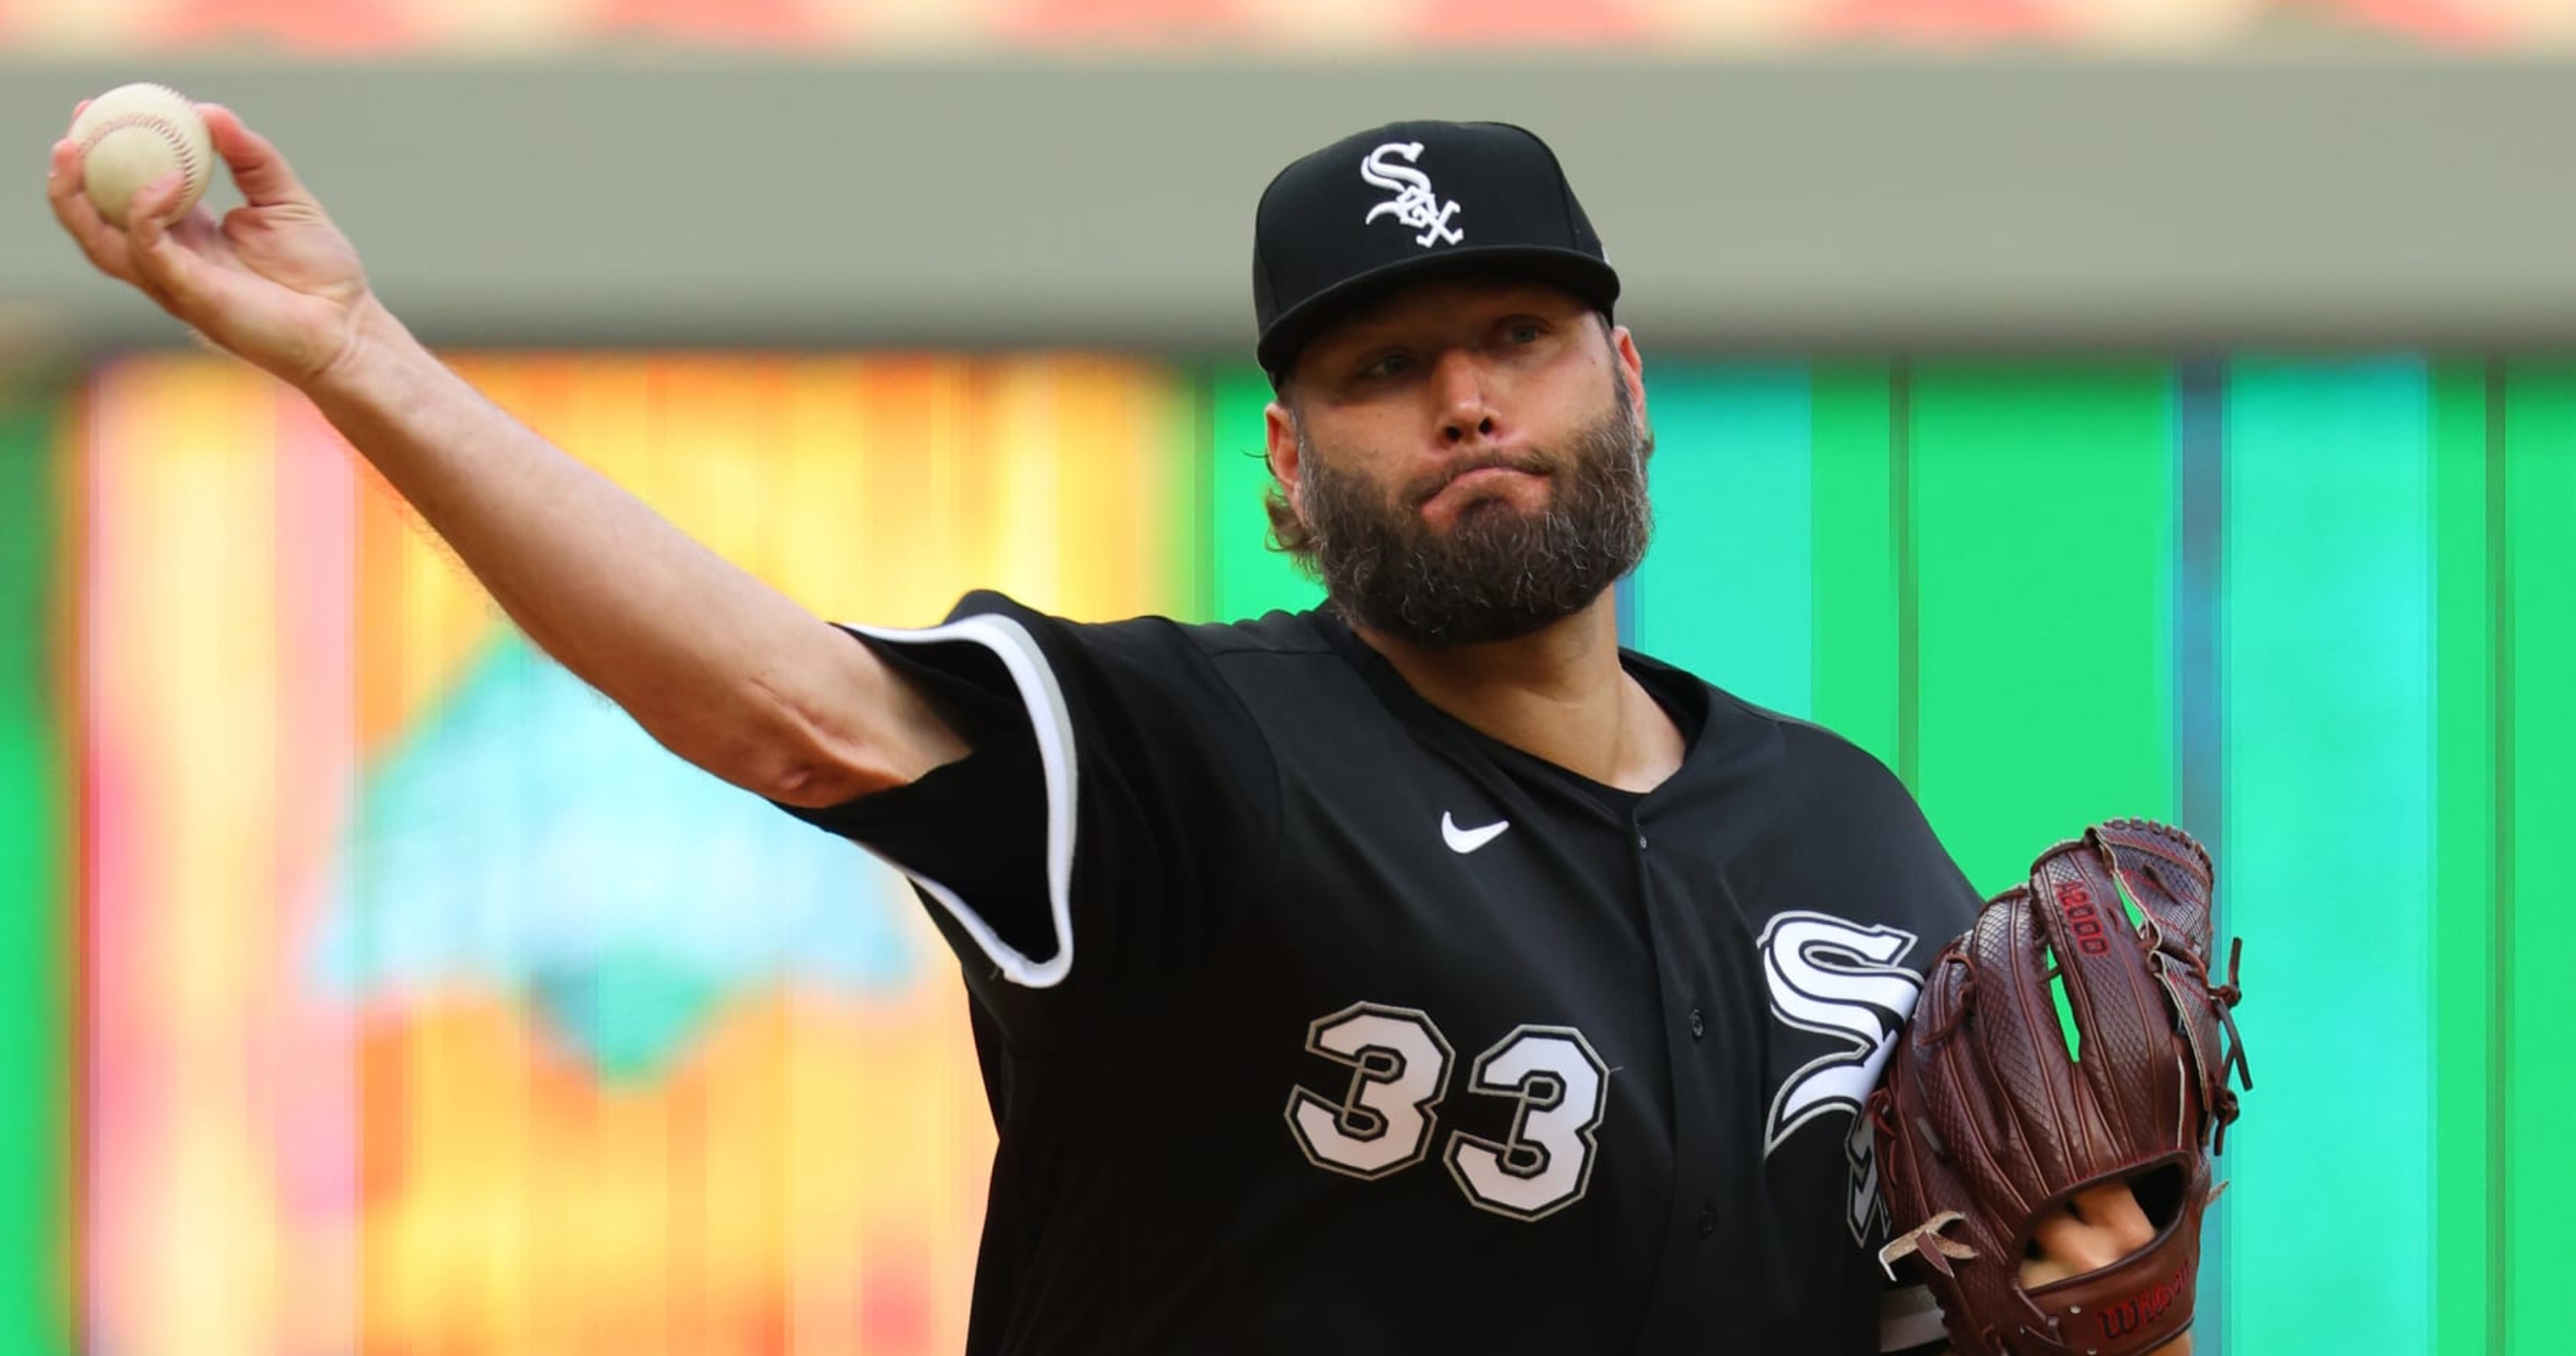 Lance Lynn goes to White Sox as Yankees play risky rotation game